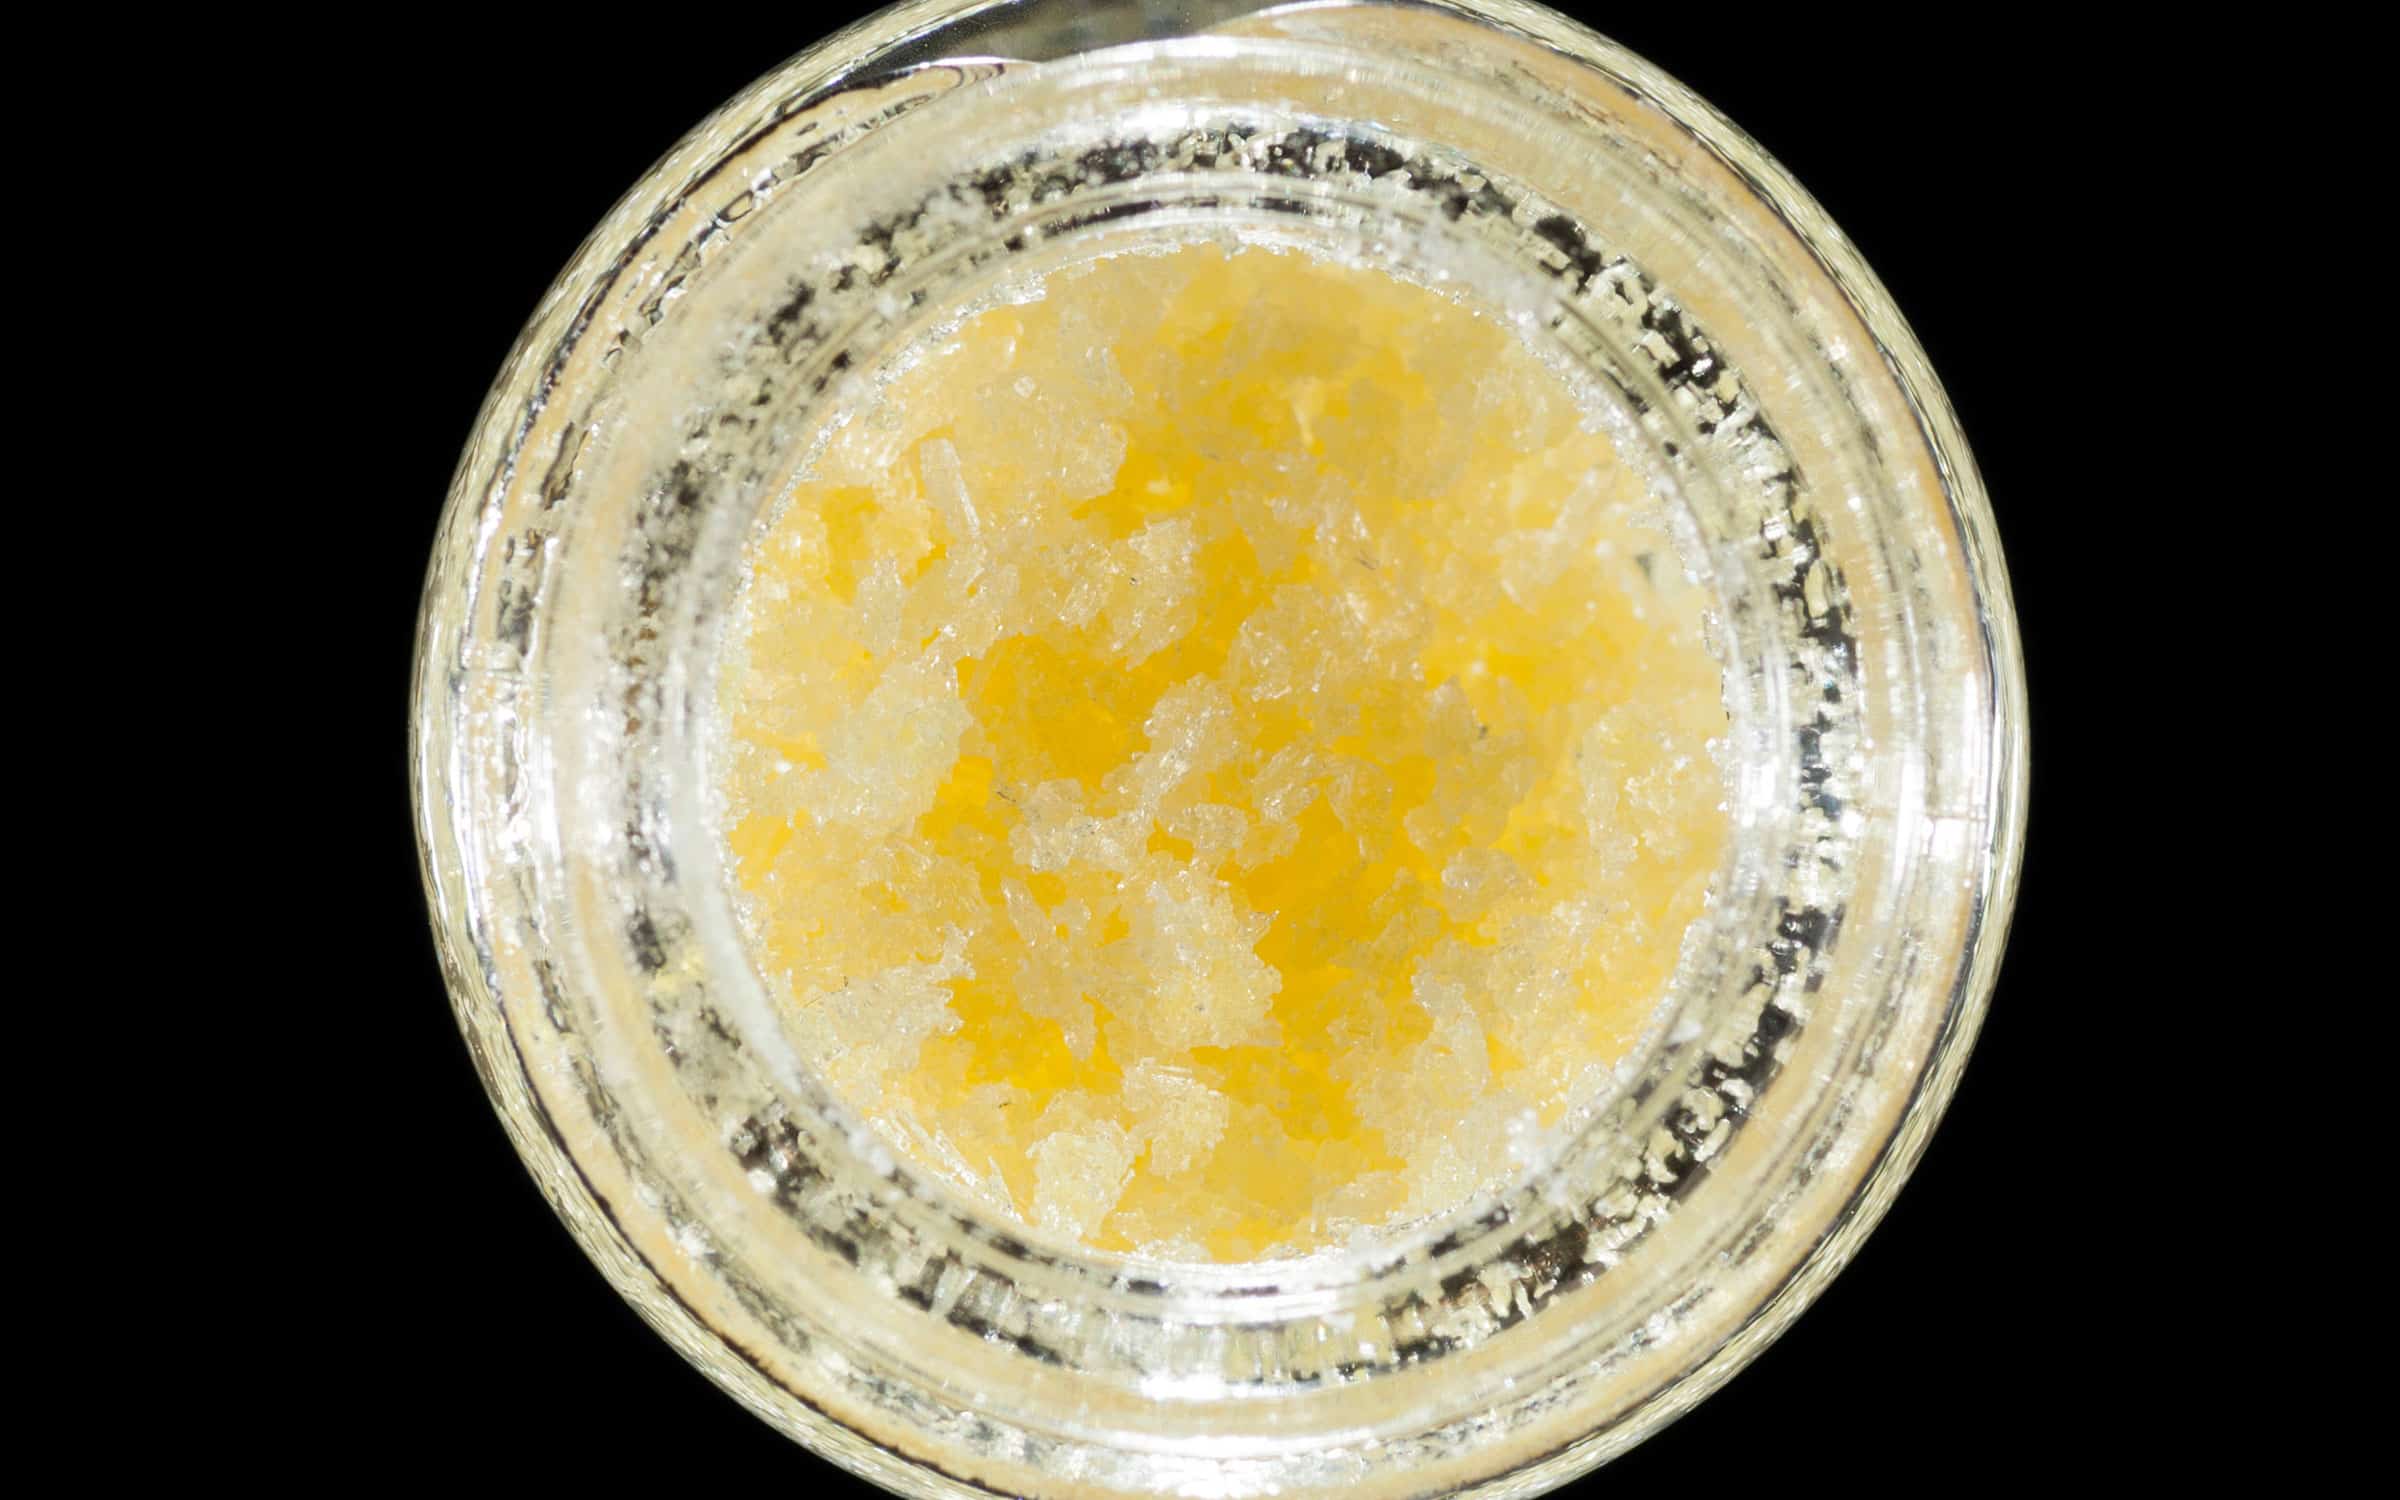 LEAFLY CANNABIS NATION CBD CONCENTRATES - Cbd|Concentrates|Products|Concentrate|Hemp|Shatter|Wax|Isolate|Product|Thc|Terpenes|Oil|Effects|Cannabis|Cannabinoids|Spectrum|Plant|Form|Way|Pure|Extract|Powder|Crystals|Dab|Process|Extraction|Flower|People|Benefits|Vape|Body|Experience|Resin|Quality|Waxes|Health|Time|Potency|Amount|Forms|Cbd Concentrates|Cbd Concentrate|Cbd Wax|Cbd Shatter|Cbd Products|Cbd Isolate|Dab Rig|Cannabis Plant|Live Resin|Hemp Plant|Cbd Waxes|Free Shipping|Cbd Oil|Cbd Crystals|Tweedle Farms|Cbd Dabs|Full Spectrum Cbd|Dab Pen|Extraction Process|Daily Basis|Cbd Isolates|Entourage Effect|Scientific Hemp Oil®|Blue Moon Hemp|Cbd Oil Solutions|Pure Cbd Isolate|Pure Cbd|Small Amount|United States|Cbd Flower